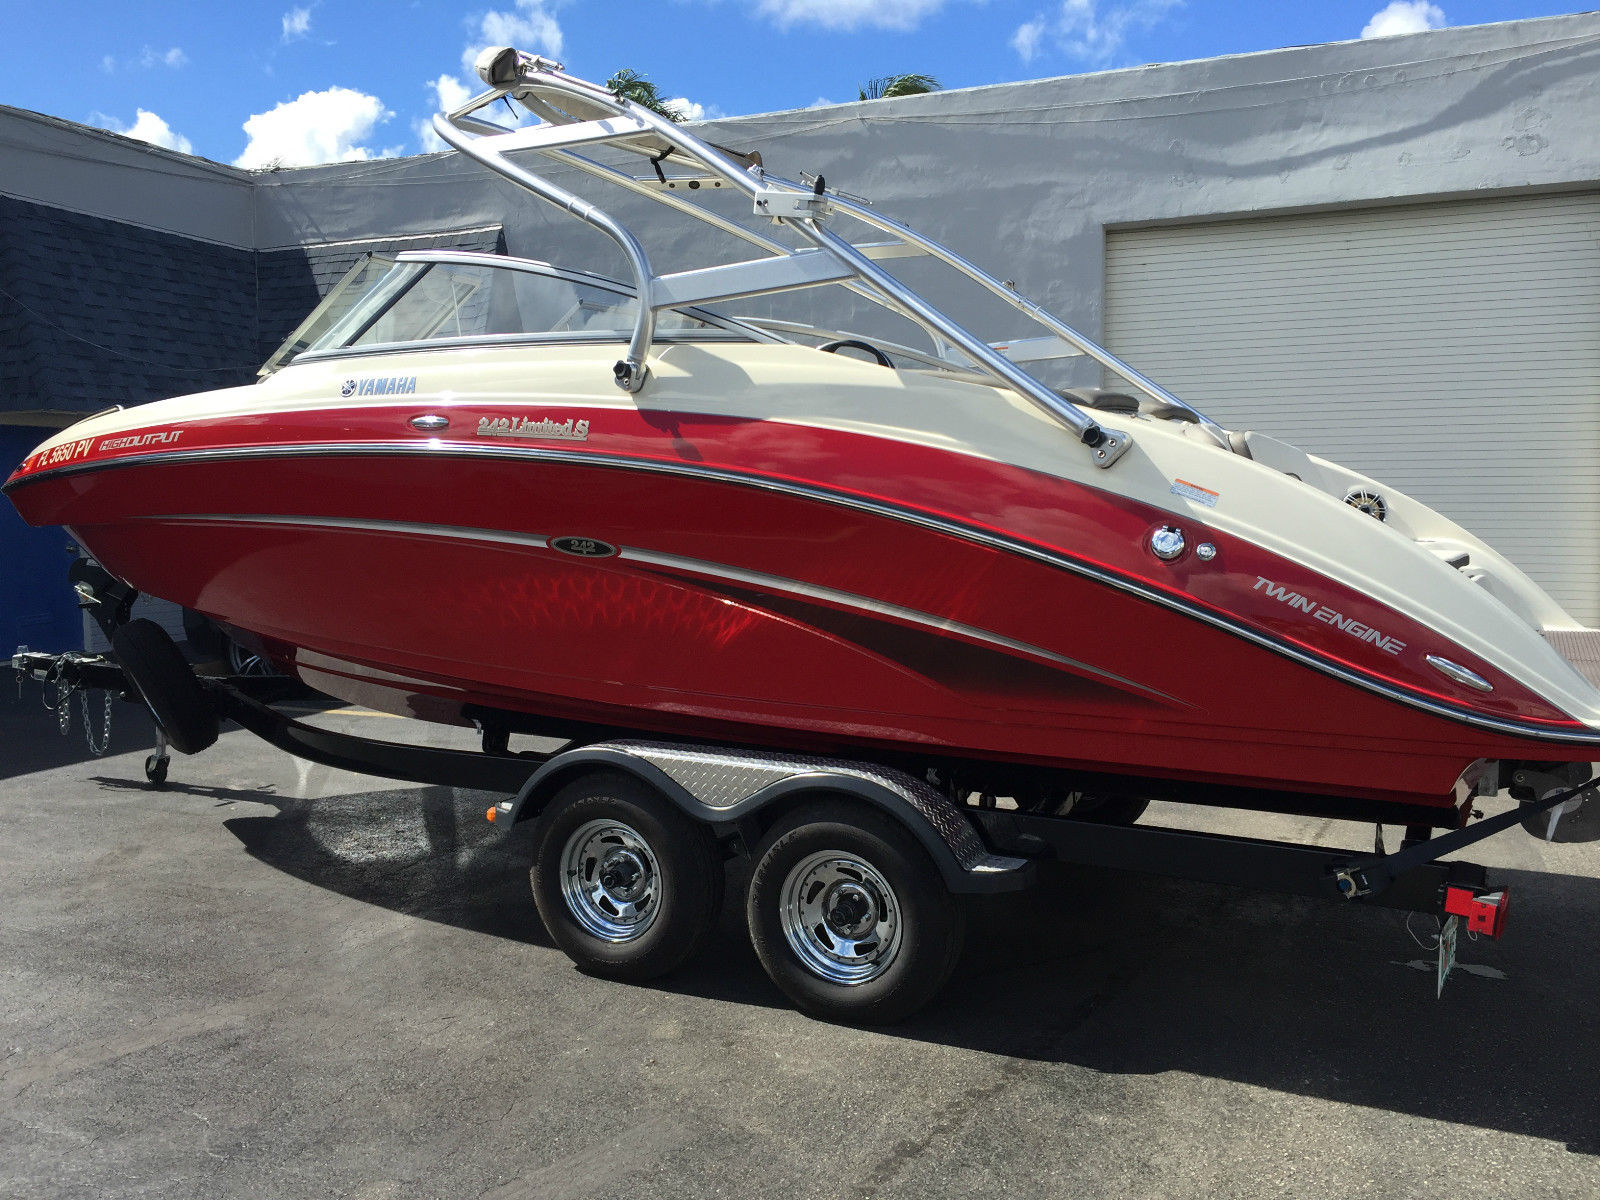 yamaha-242-limited-s-2014-for-sale-for-100-boats-from-usa